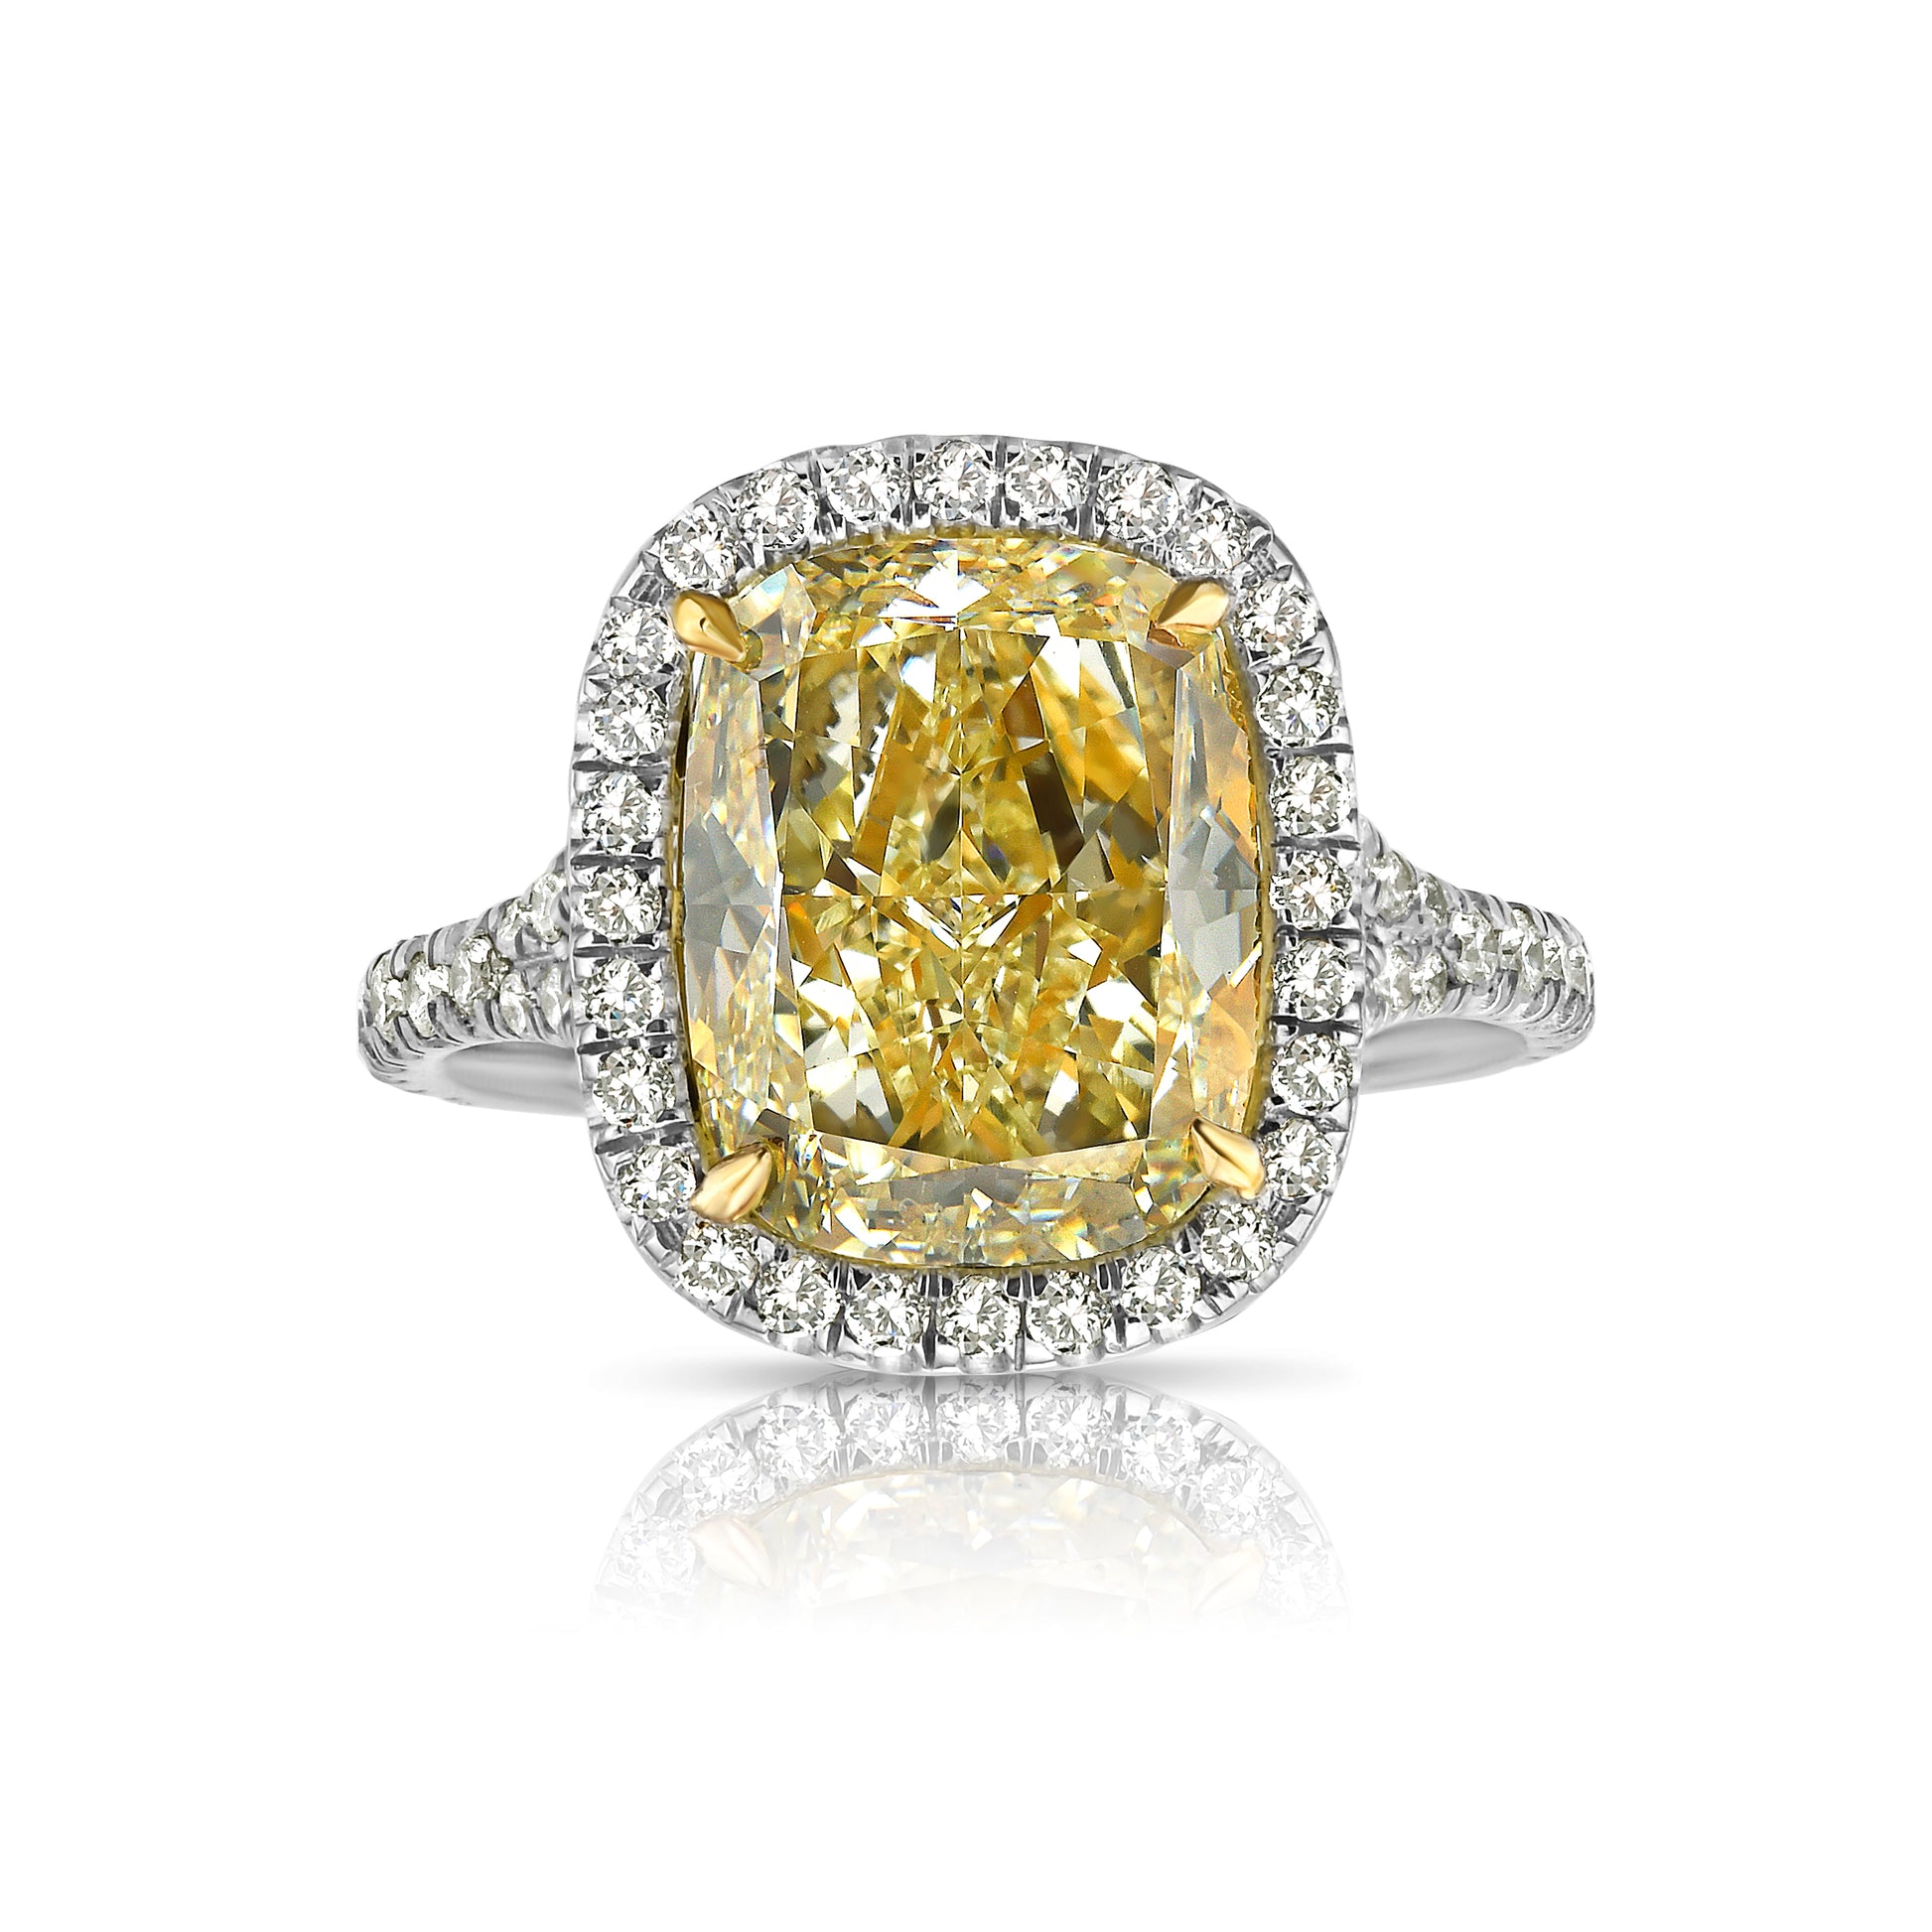 4.73 Carat Center Diamond GIA Light Yellow VS2 Clarity Cushion Cut Diamond 0.52 Carats of White Rounds Set in Platinum and 18k Gold Split Shank band Handmade in NYC GIA Certified Diamond